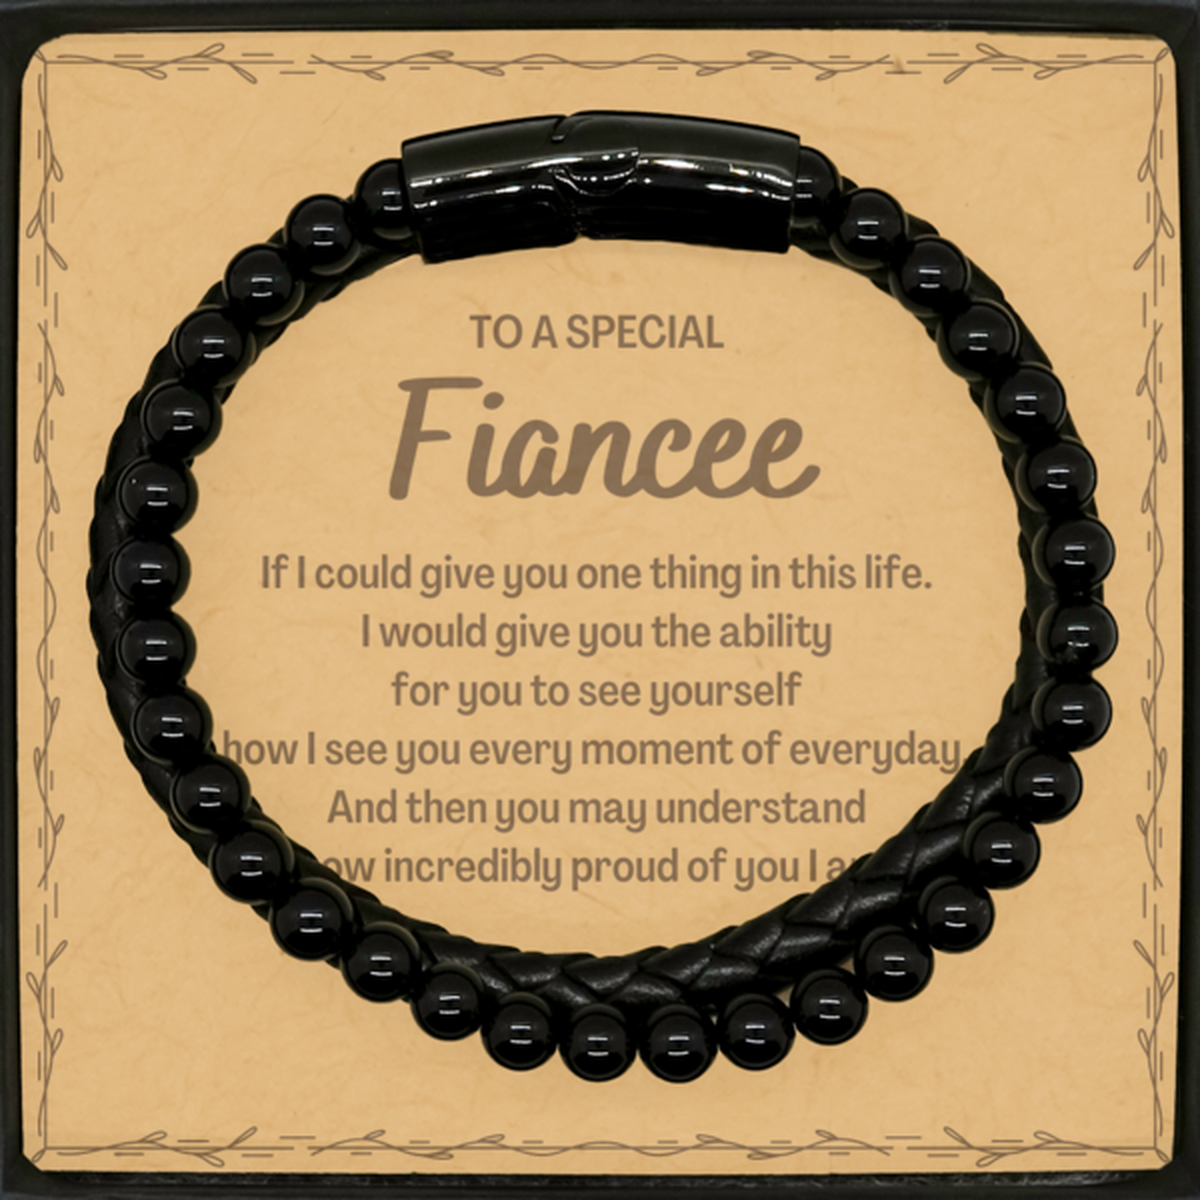 To My Fiancee Stone Leather Bracelets, Gifts For Fiancee Message Card, Inspirational Gifts for Christmas Birthday, Epic Gifts for Fiancee To A Special Fiancee how incredibly proud of you I am